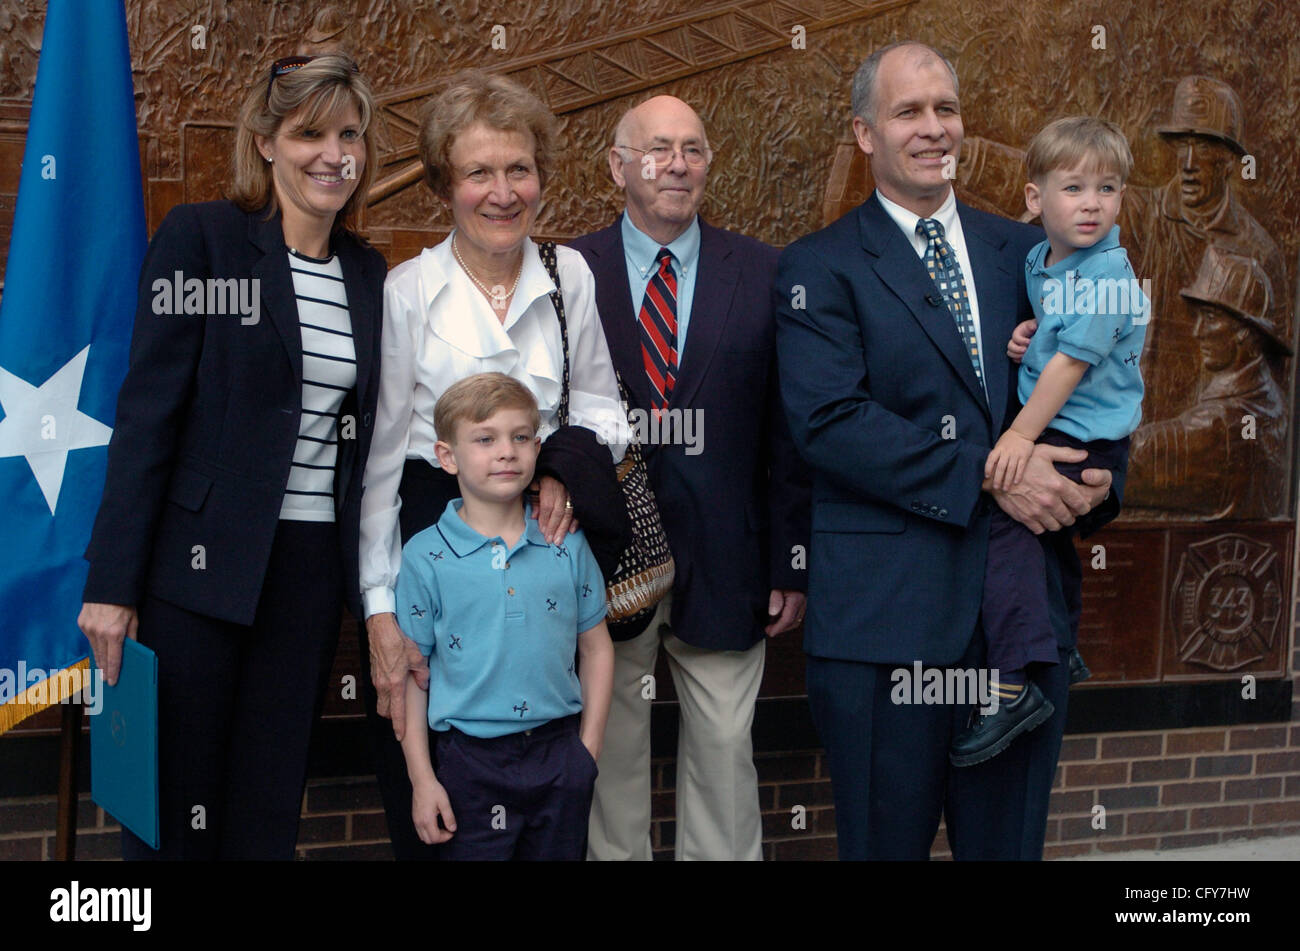 Dr. Alan Flower (R) holding his son Jackson, 3 yrs. old with his wife Kristie (L), his other son Jordan, 6 and his parents Margaret and Jerry Flower. Dr. Alan Flower, 41, of Bayville, Long Island is sworn in as an active-duty Major in the United States Air Force. Dr. Alan Flower will be stationed at Stock Photo